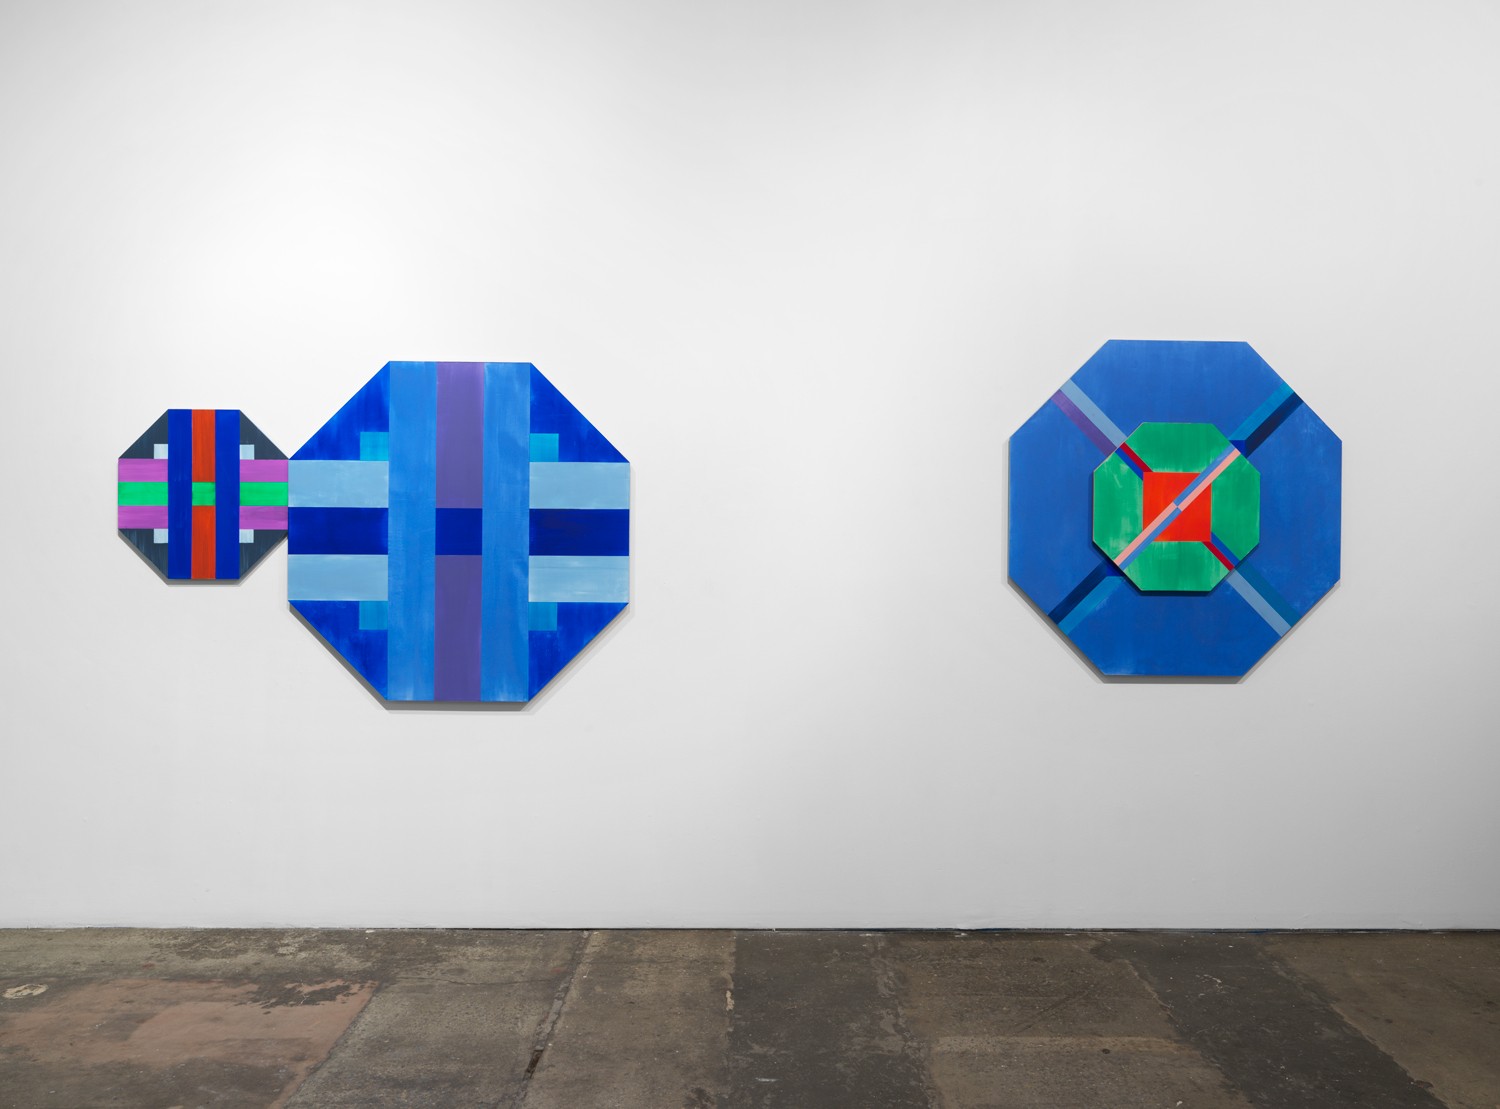 Installation view of ORRA paintings